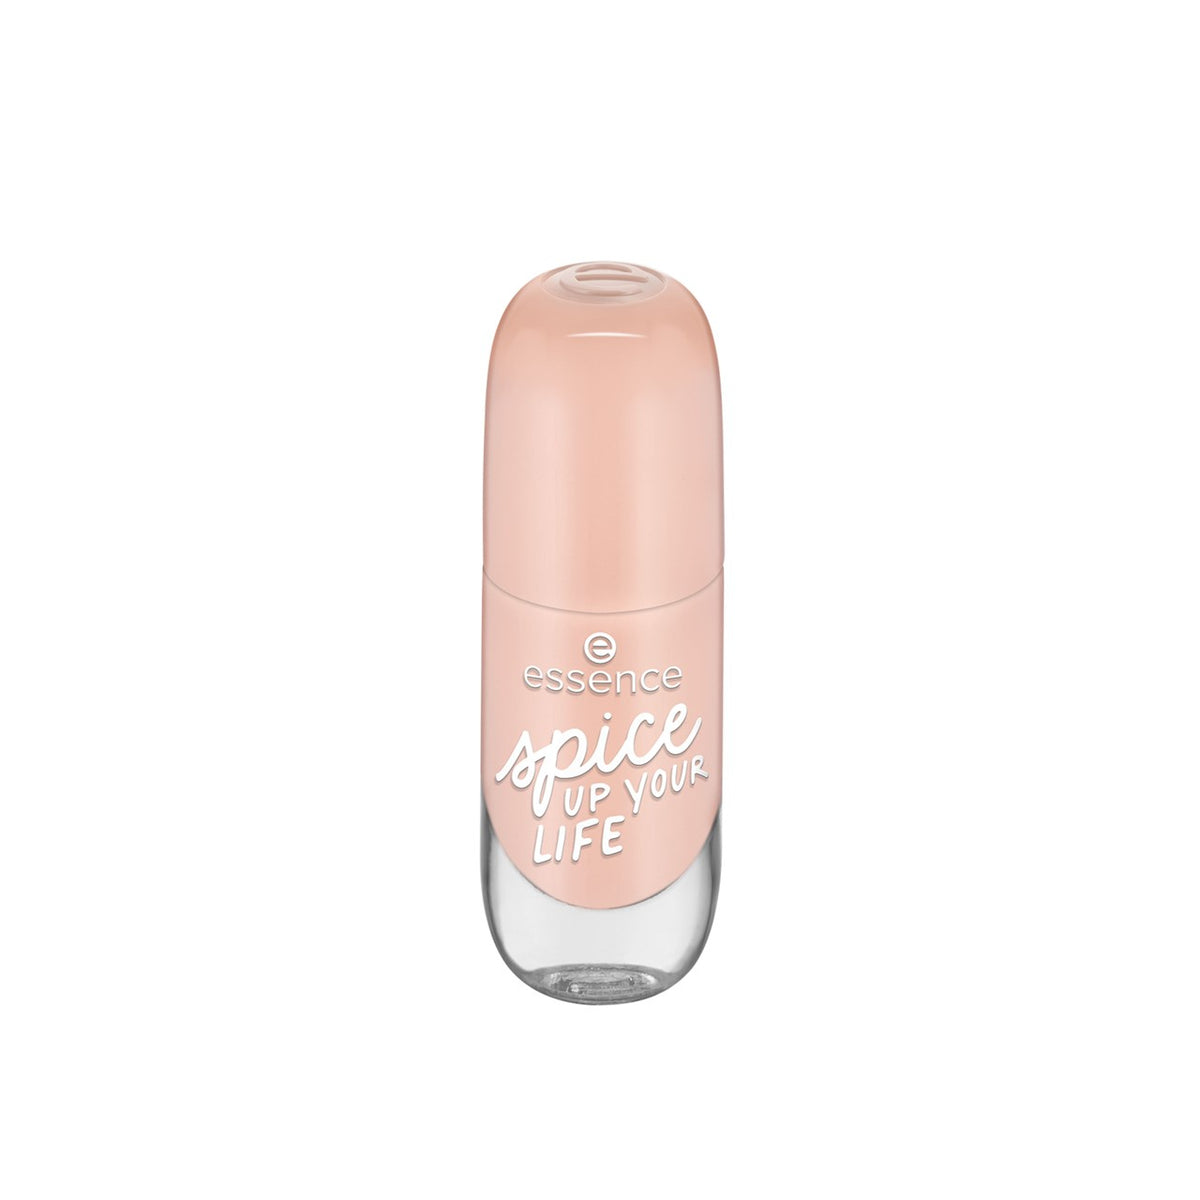 Essence Gel Nail Colour - 09 Spice Up Your Life